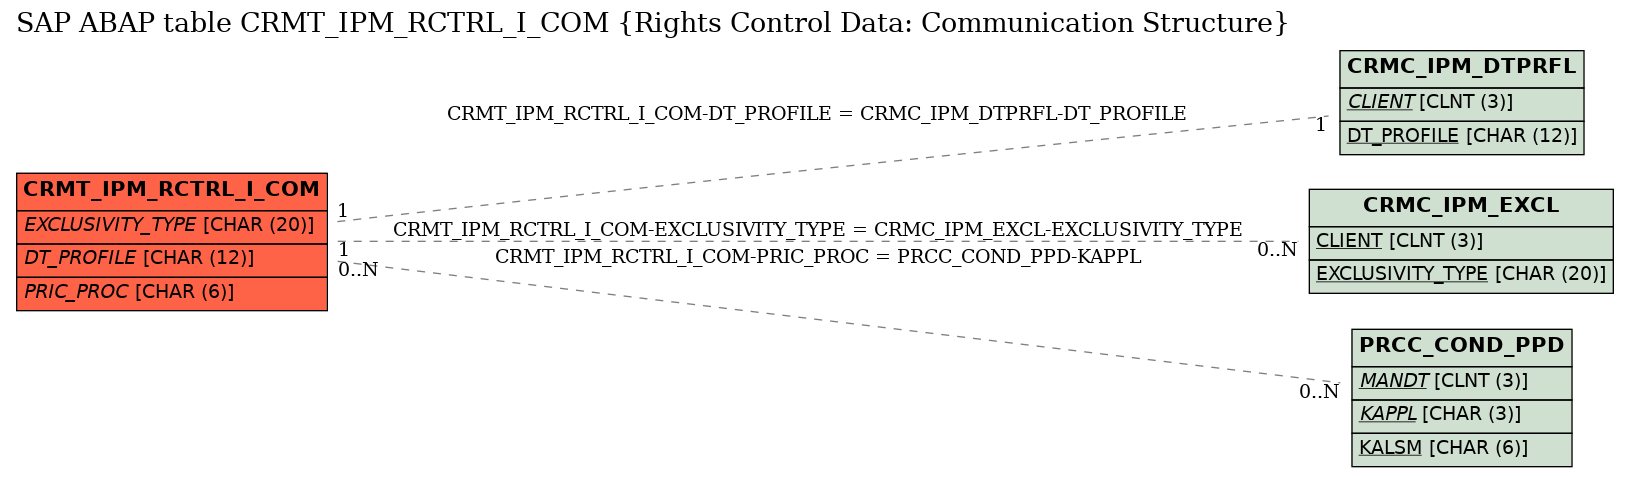 E-R Diagram for table CRMT_IPM_RCTRL_I_COM (Rights Control Data: Communication Structure)